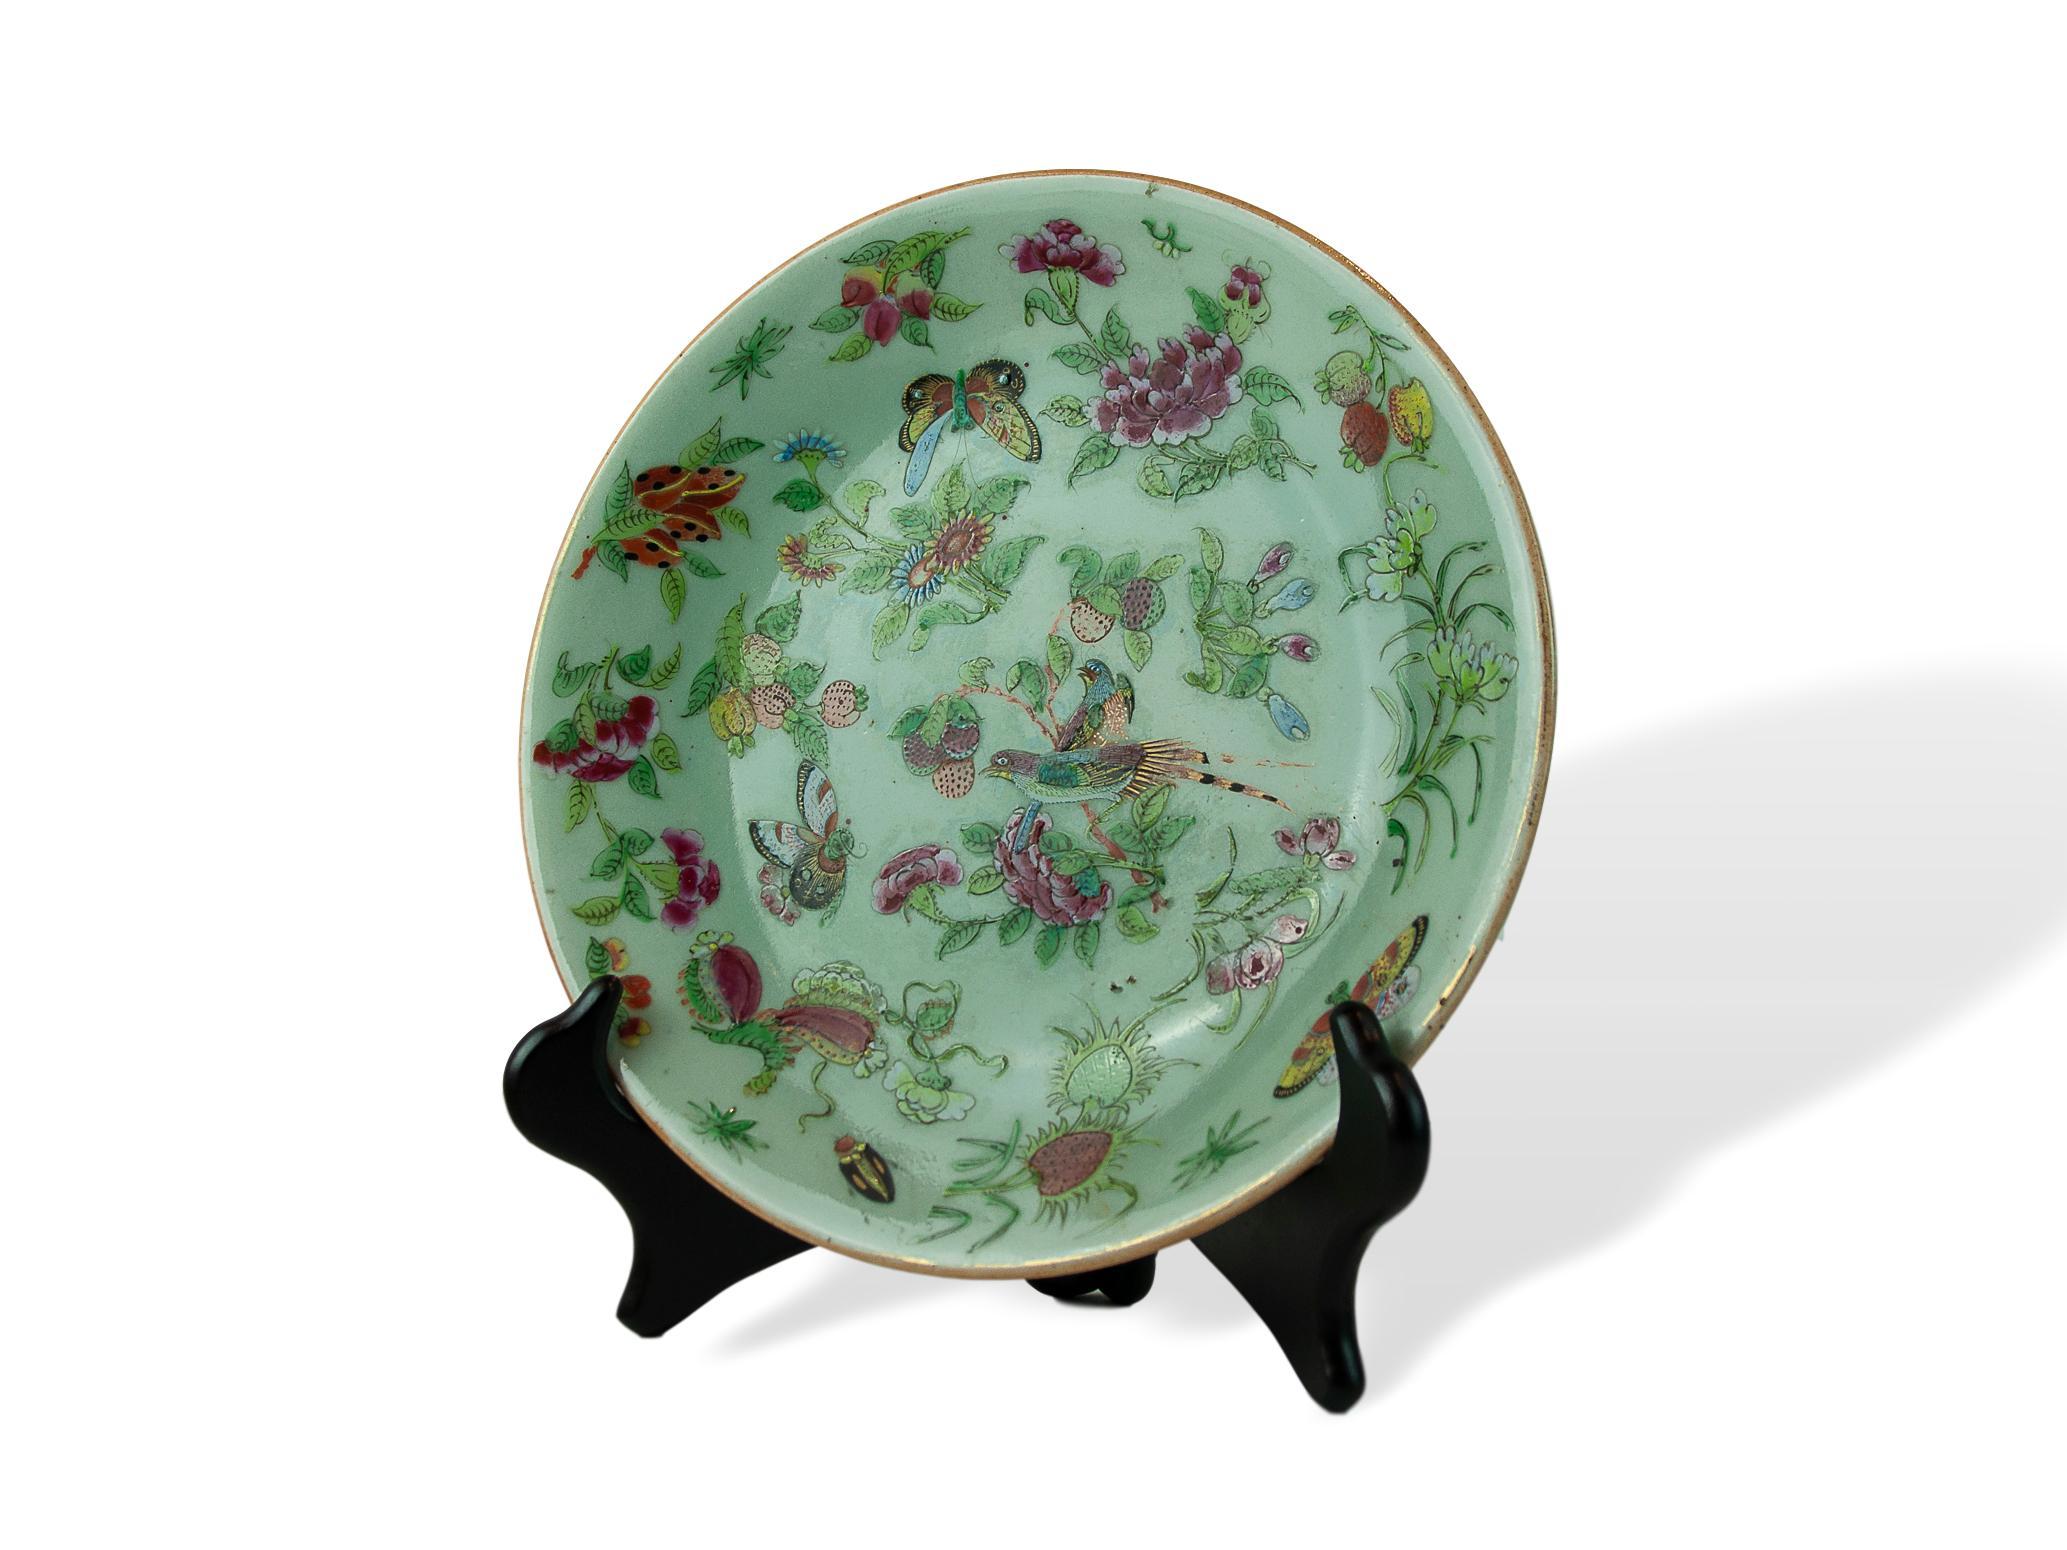 Chinese Export Chinese Celadon Famille Rose 10-inch Plate, Canton, Qing Dynasty, ca. 1850